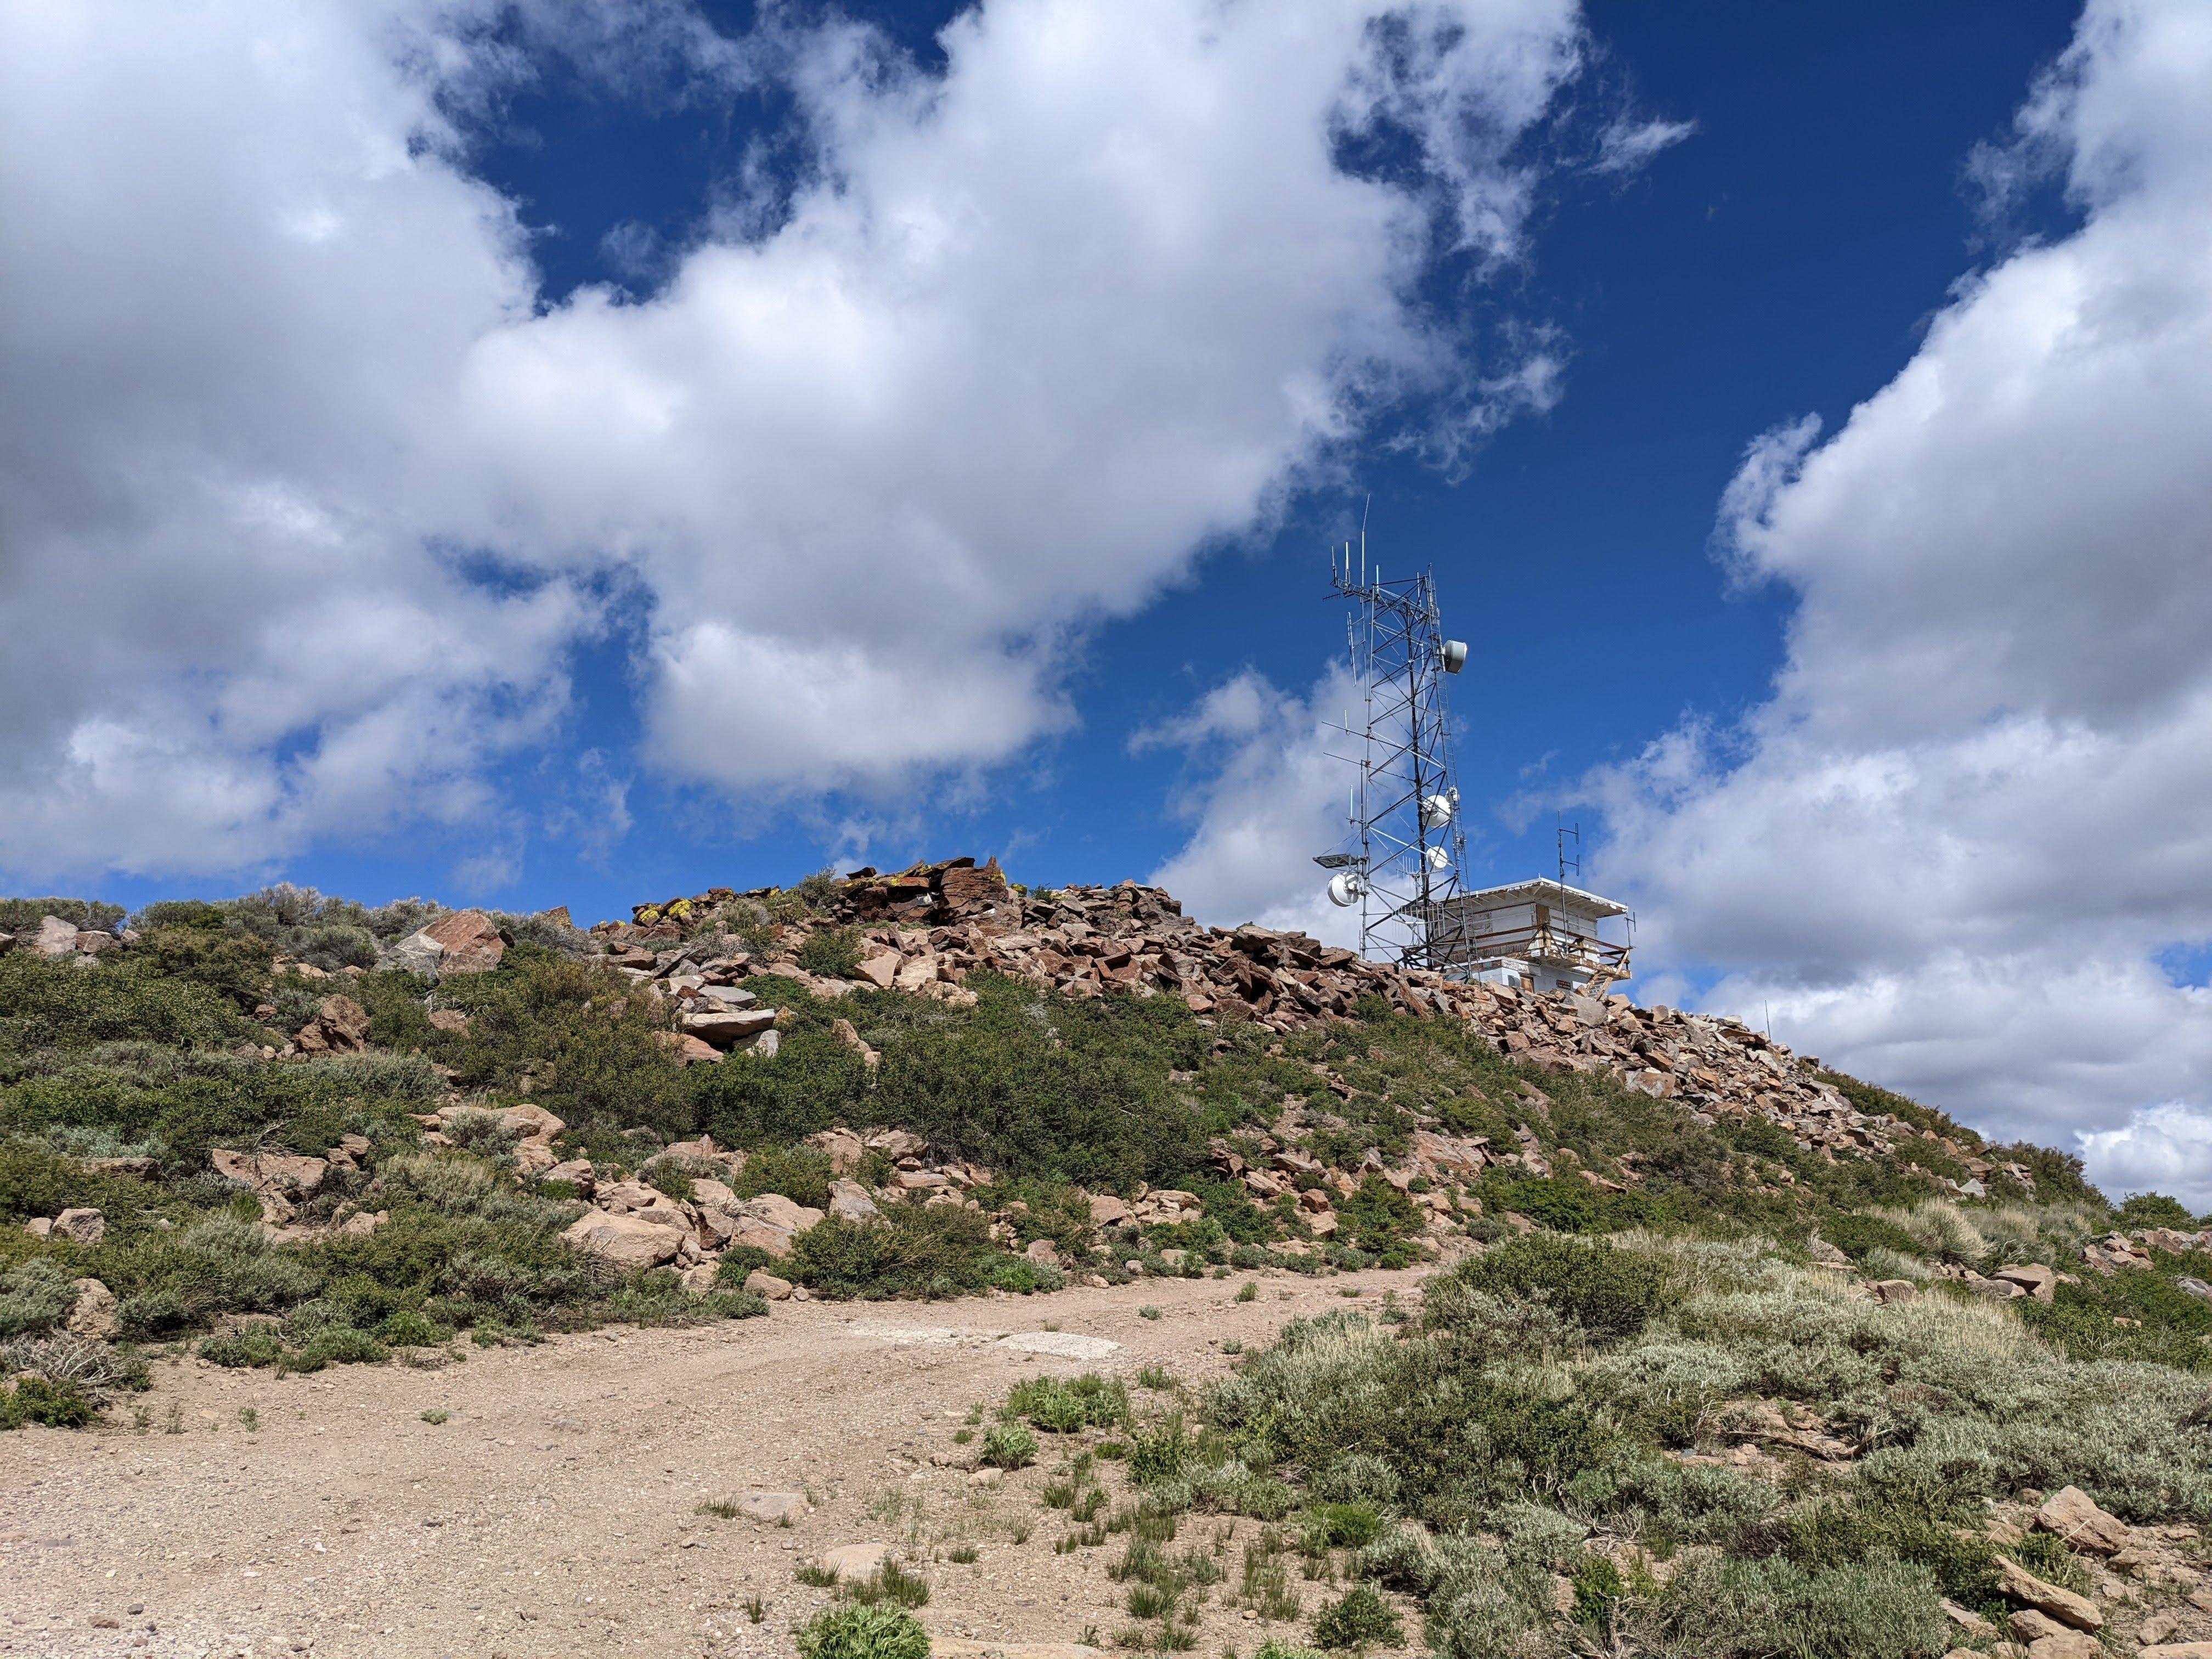 Summit - an antenna tower and a derelict fire lookout